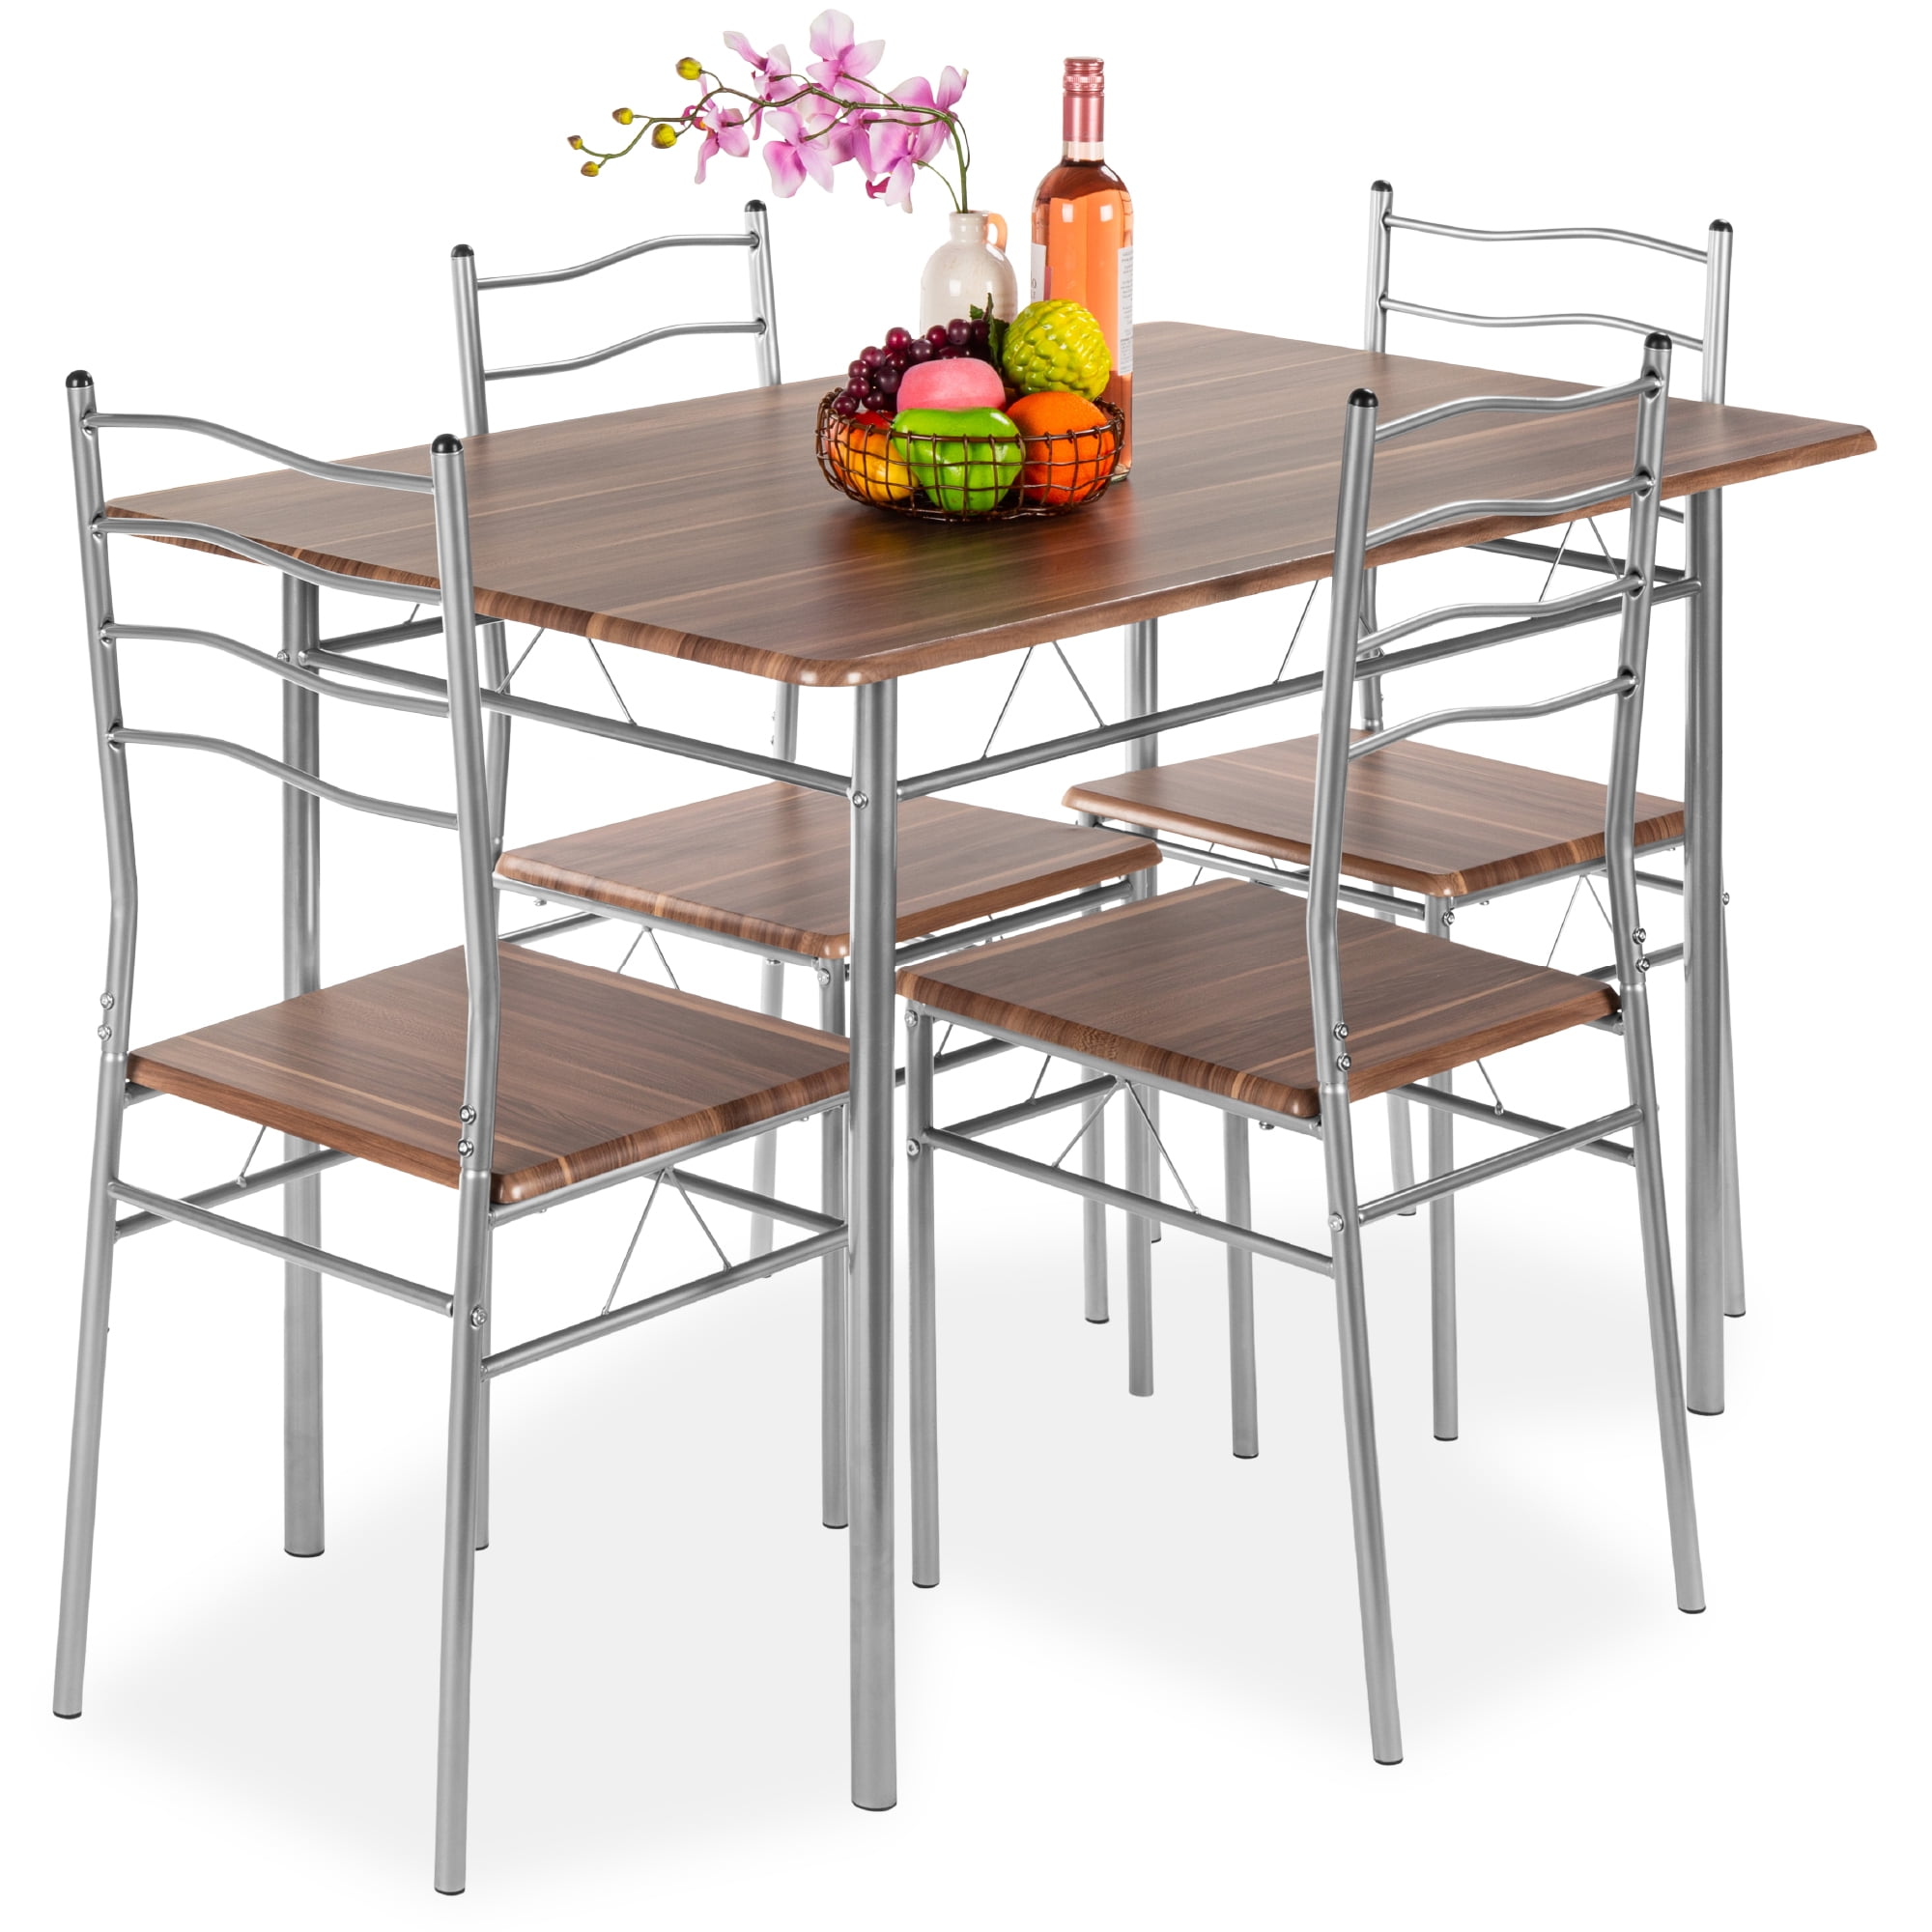 Best Choice Products 5 Piece Wooden Kitchen Table Dining Set W Metal Legs